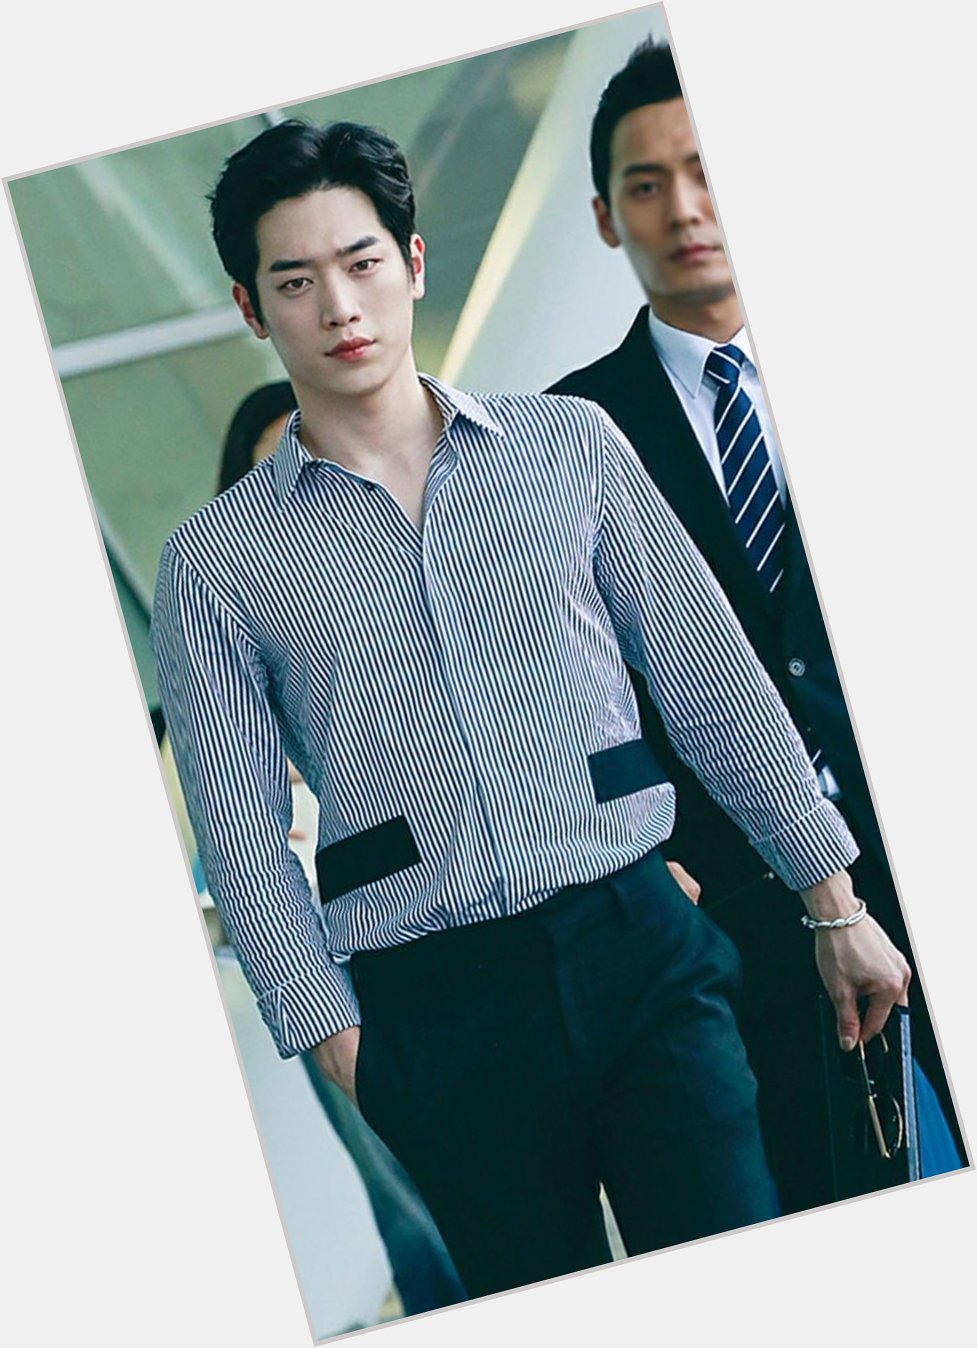 HAPPY BIRTHDAY TO ONE OF MY MOST  FAVORITE KDRAMA ACTOR IN KDRAMALAND. SEO KANG JOON. I LOVE YOU   